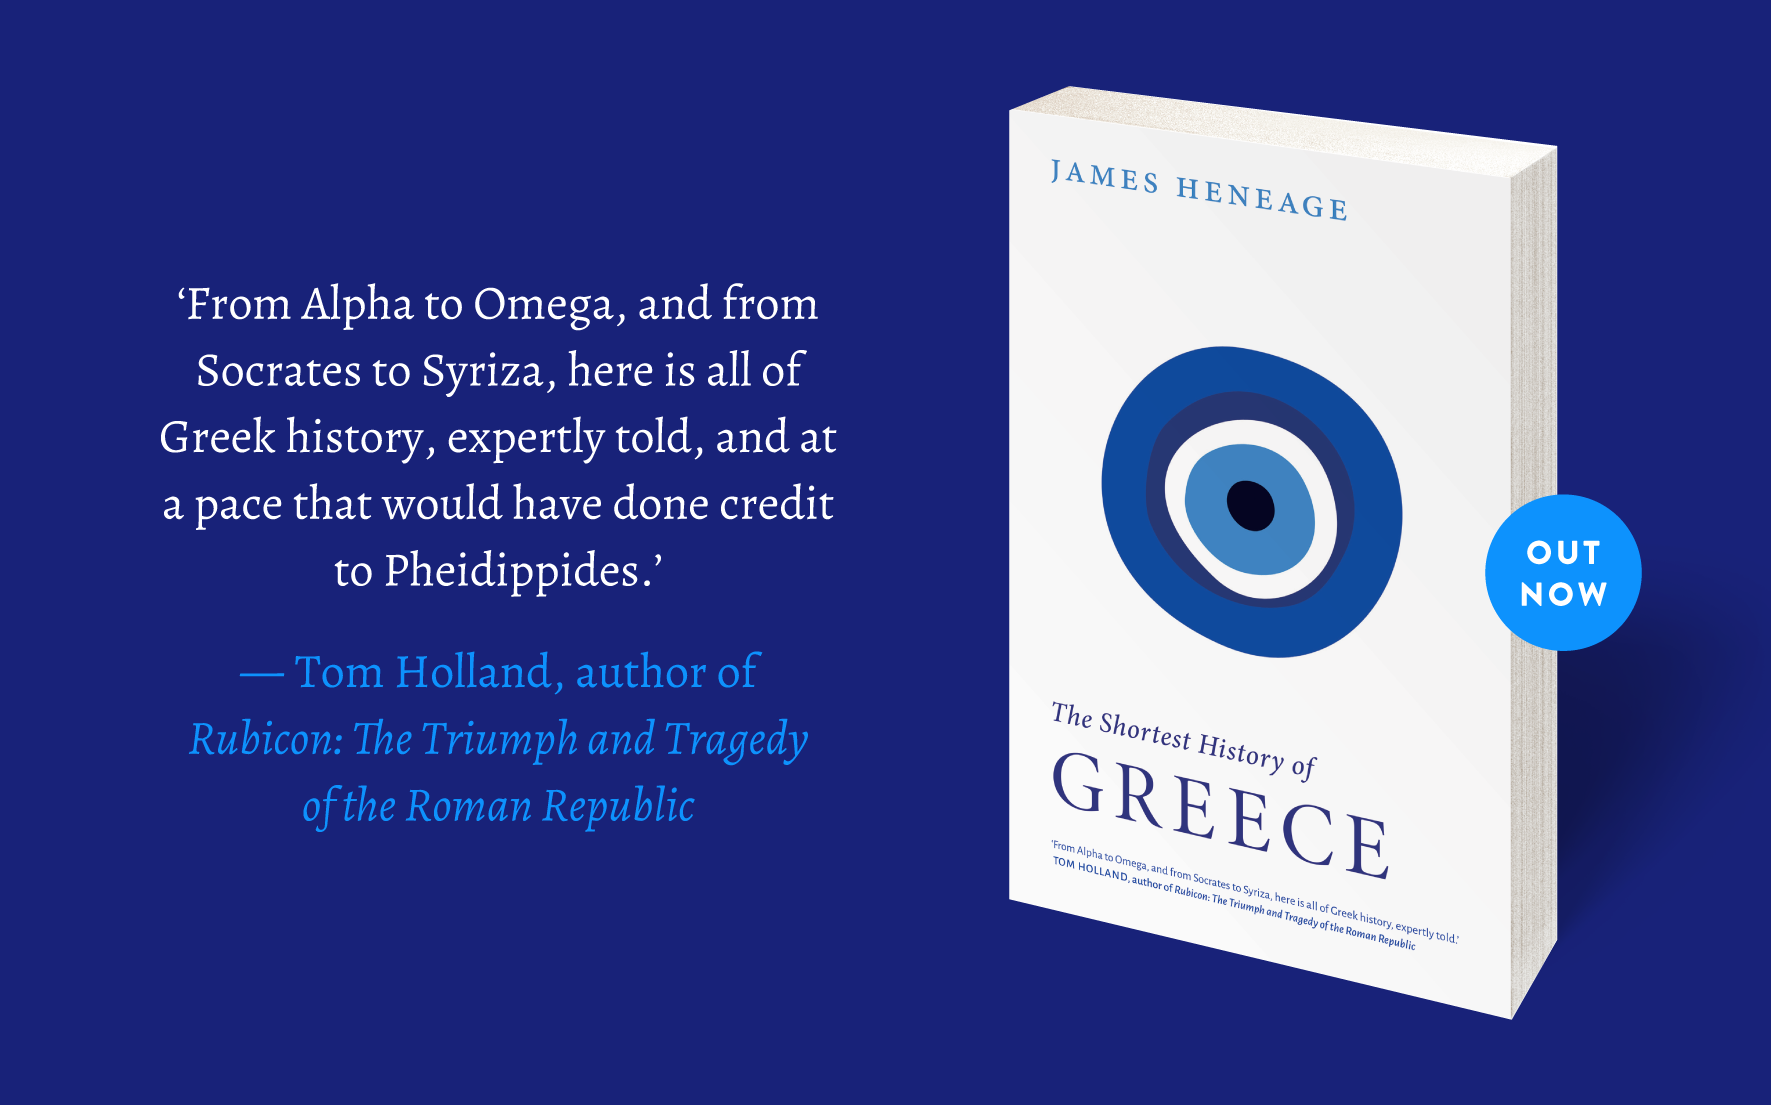 Out now: The Shortest History of Greece 